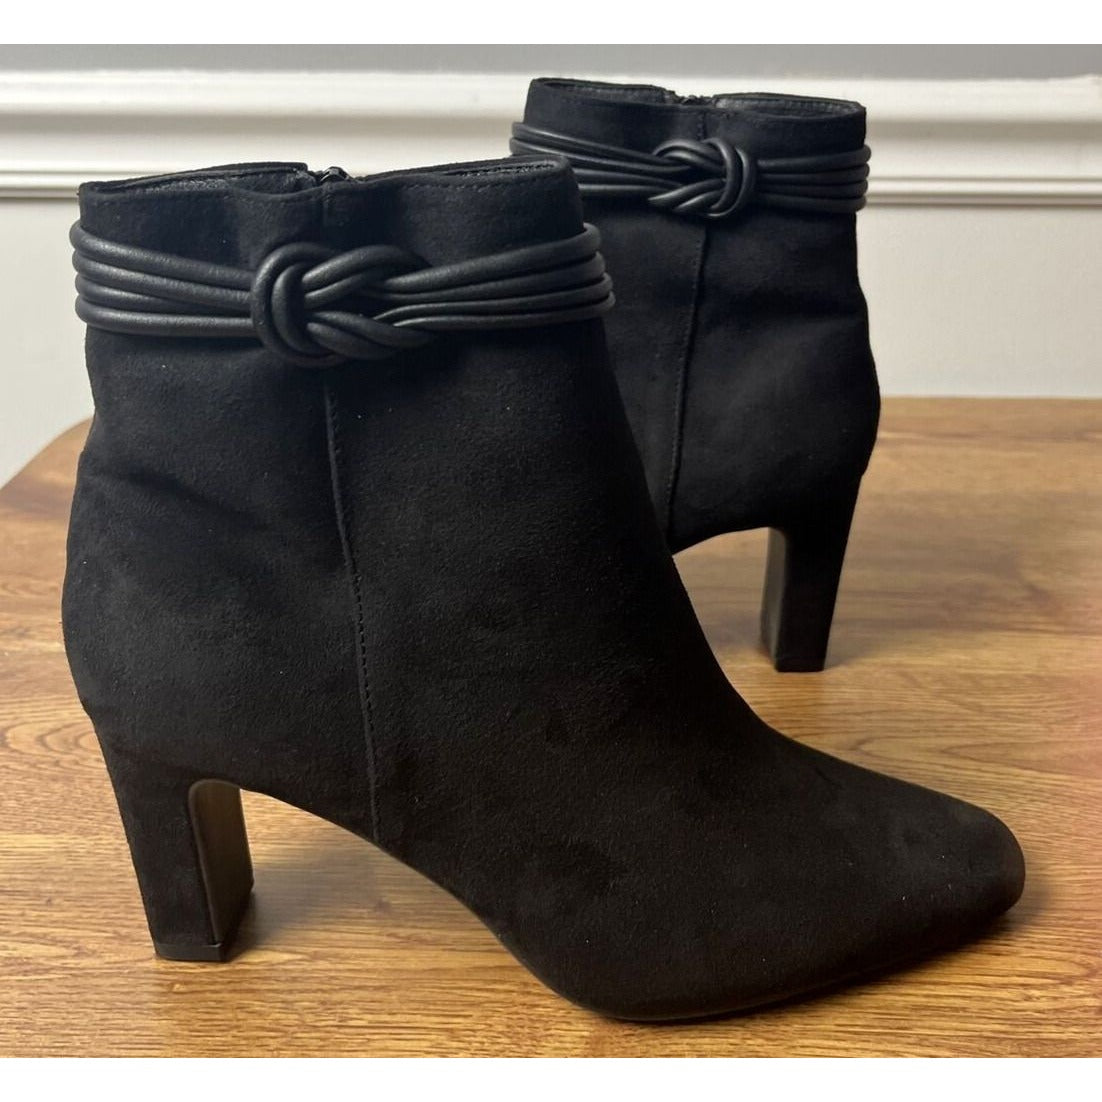 CL by Laundry Women's Never Ending Ankle Boot Black Size 7.5M